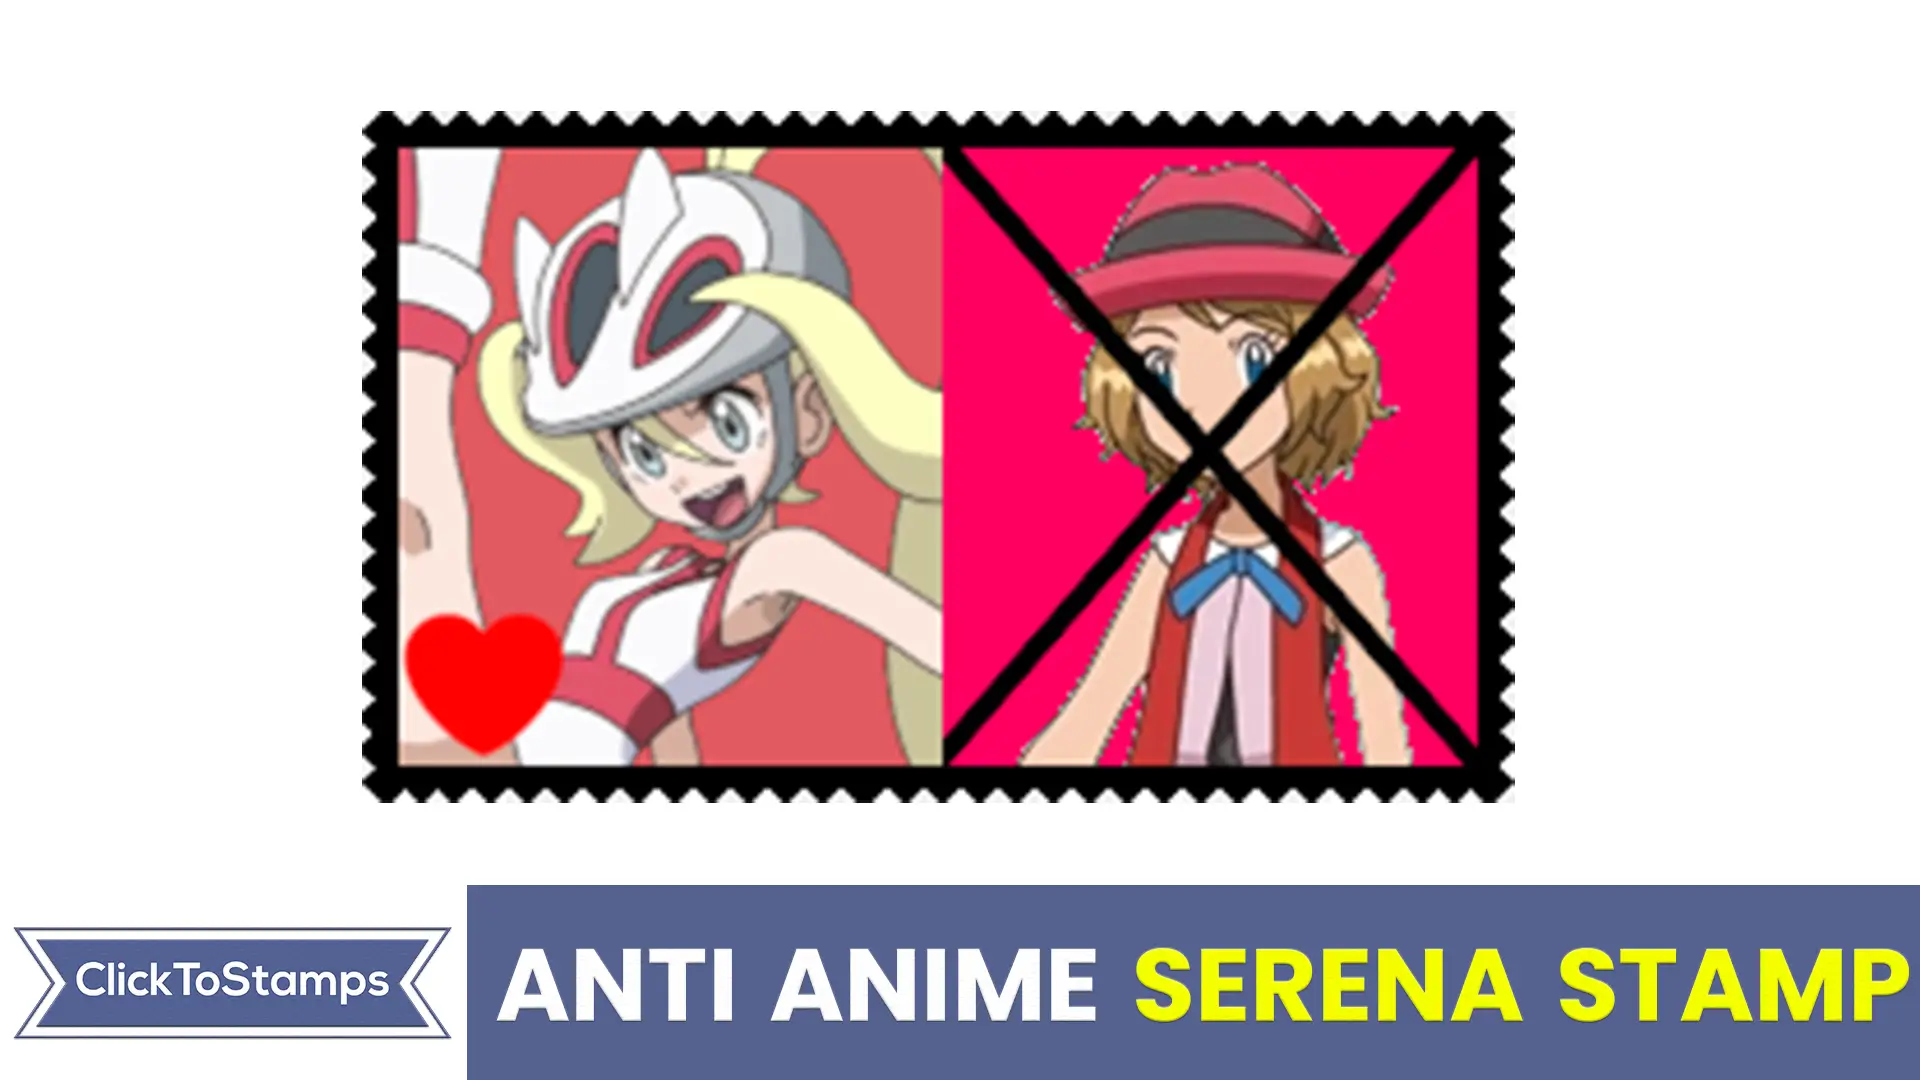 What is the Anti Anime Serena Stamp